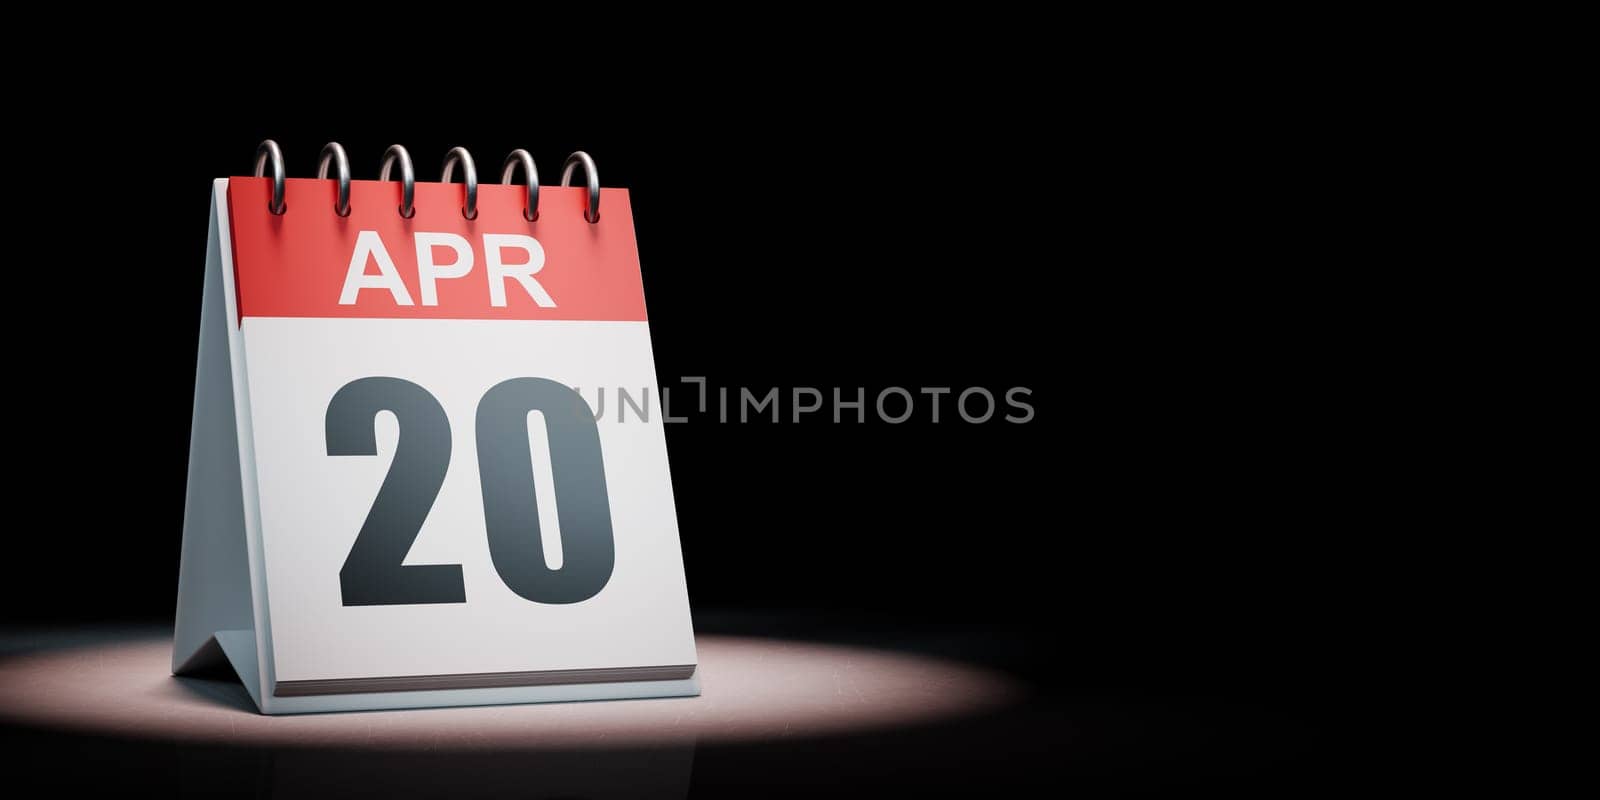 Red and White April 20 Desk Calendar Spotlighted on Black Background with Copy Space 3D Illustration